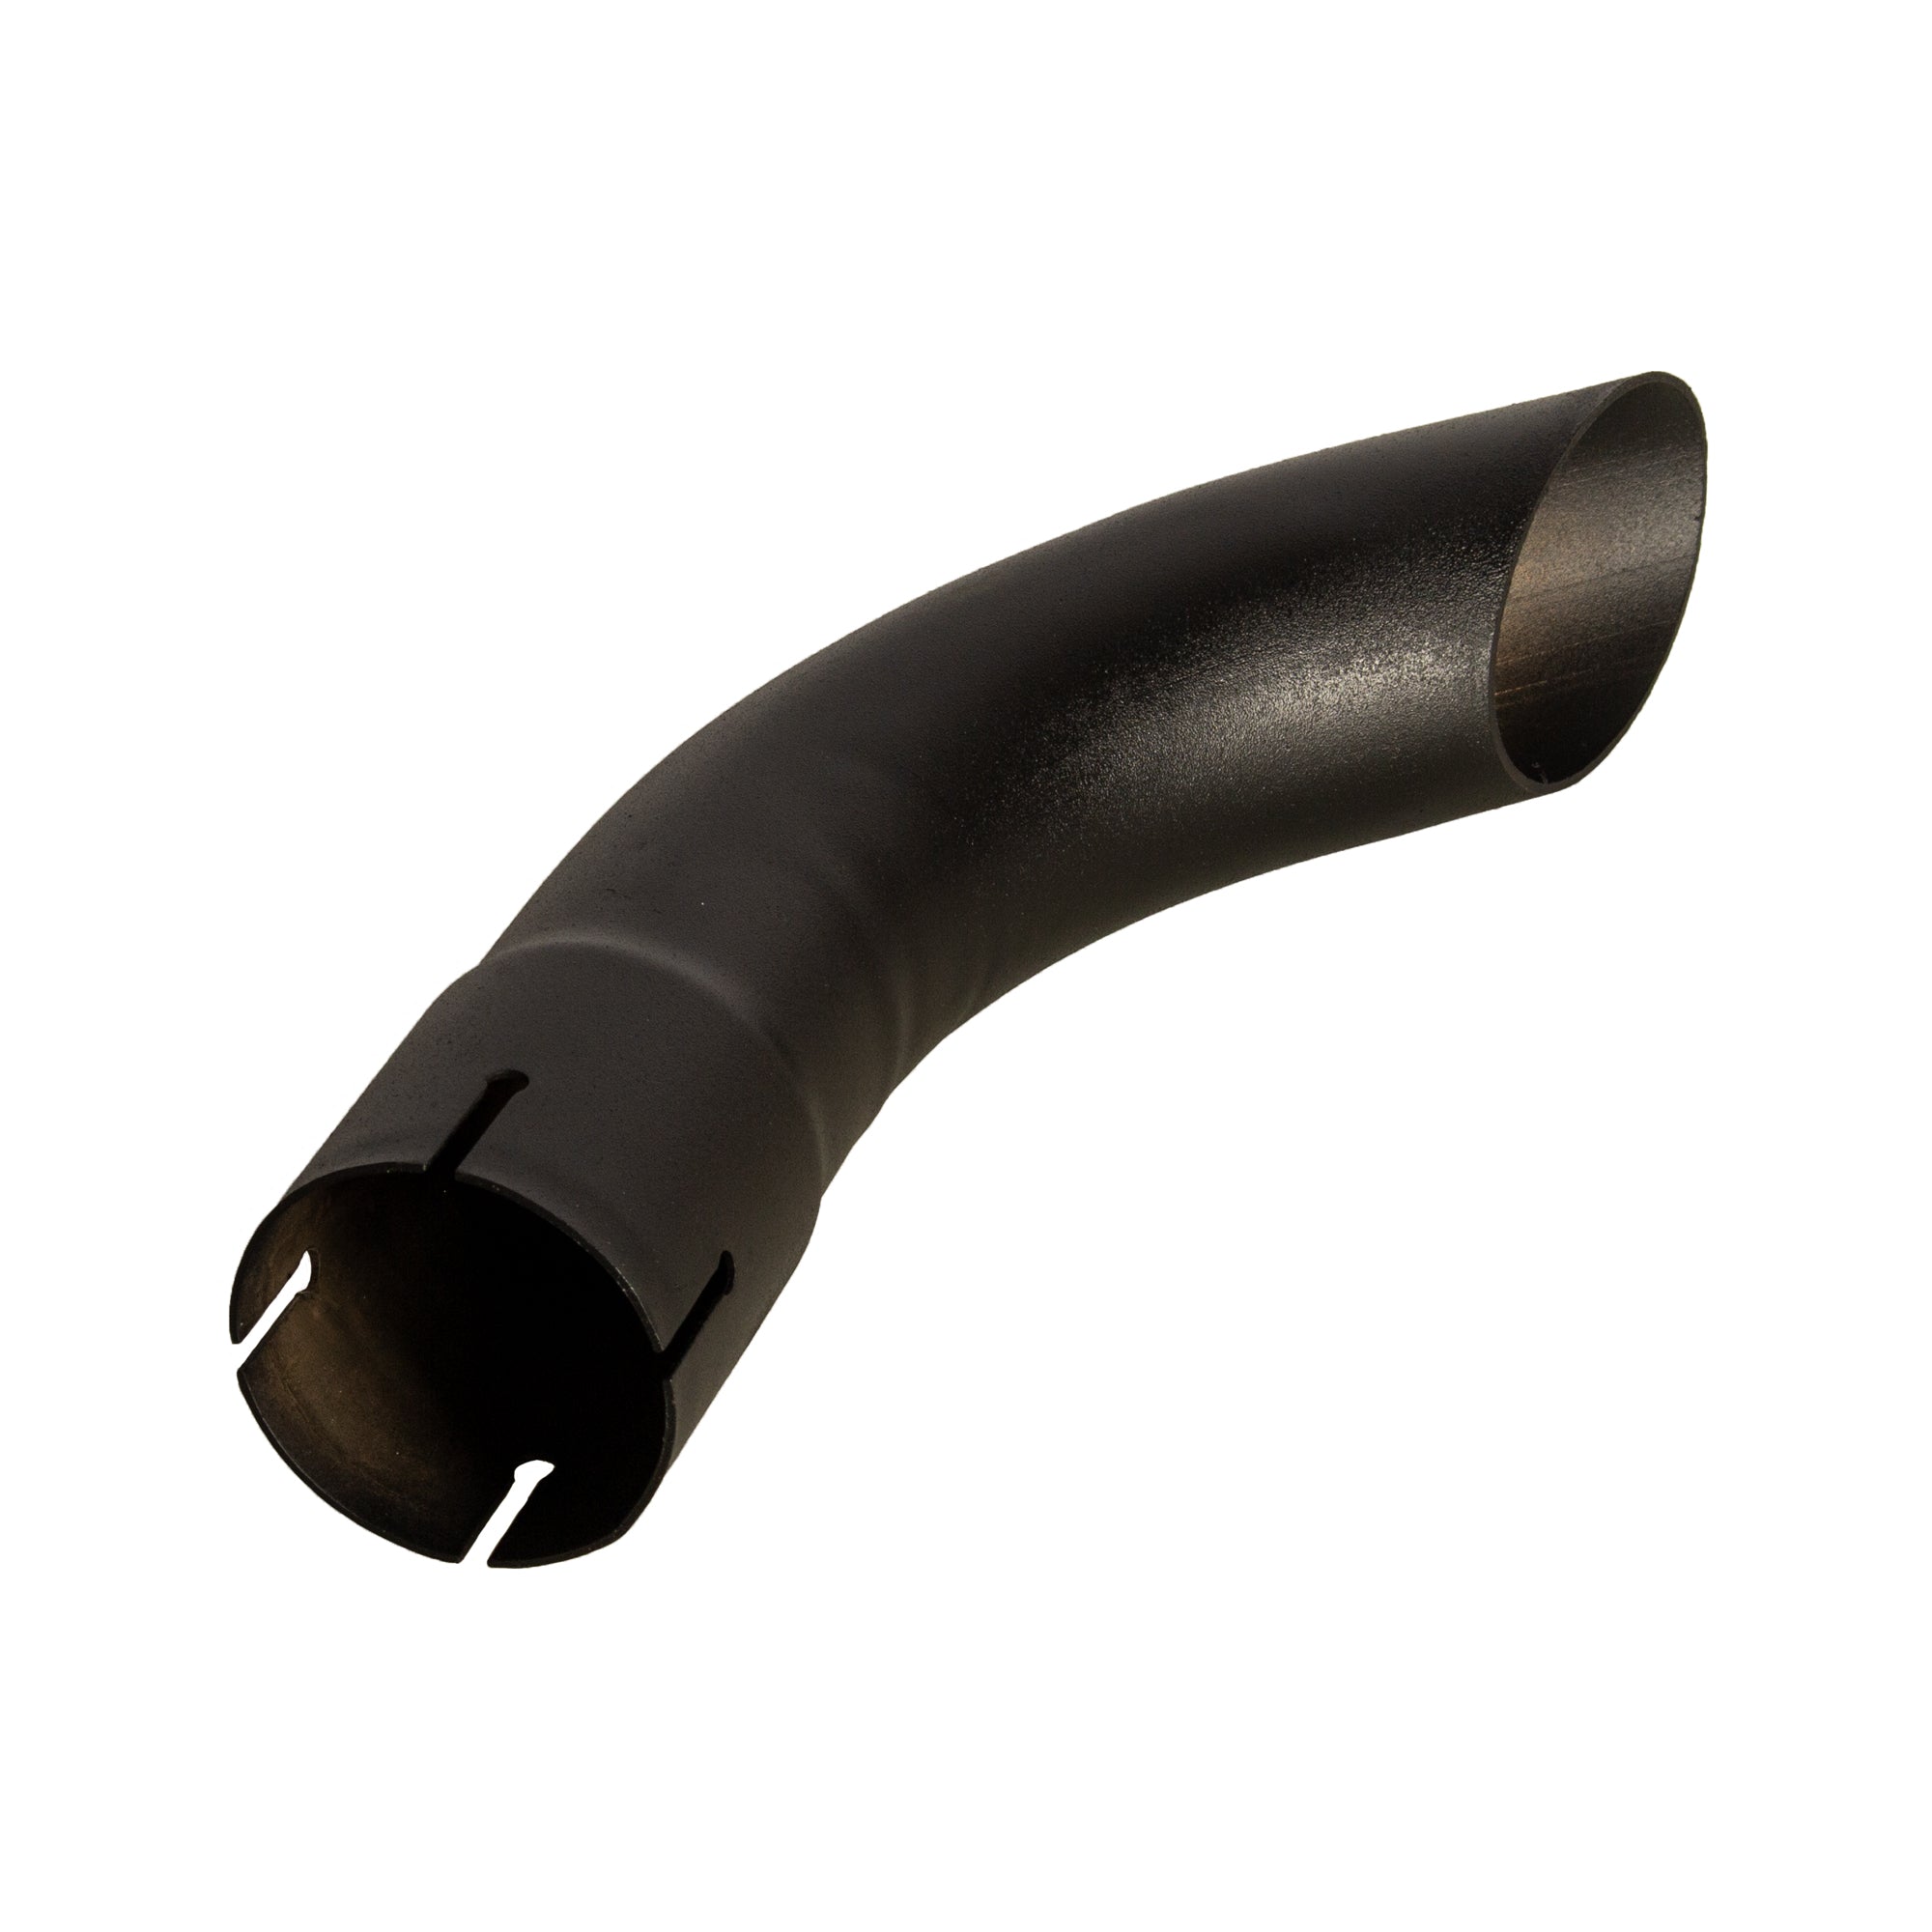 Exhaust Stack Pipe Replacement for Universal - 2 -3/8" x 12", Curved Black